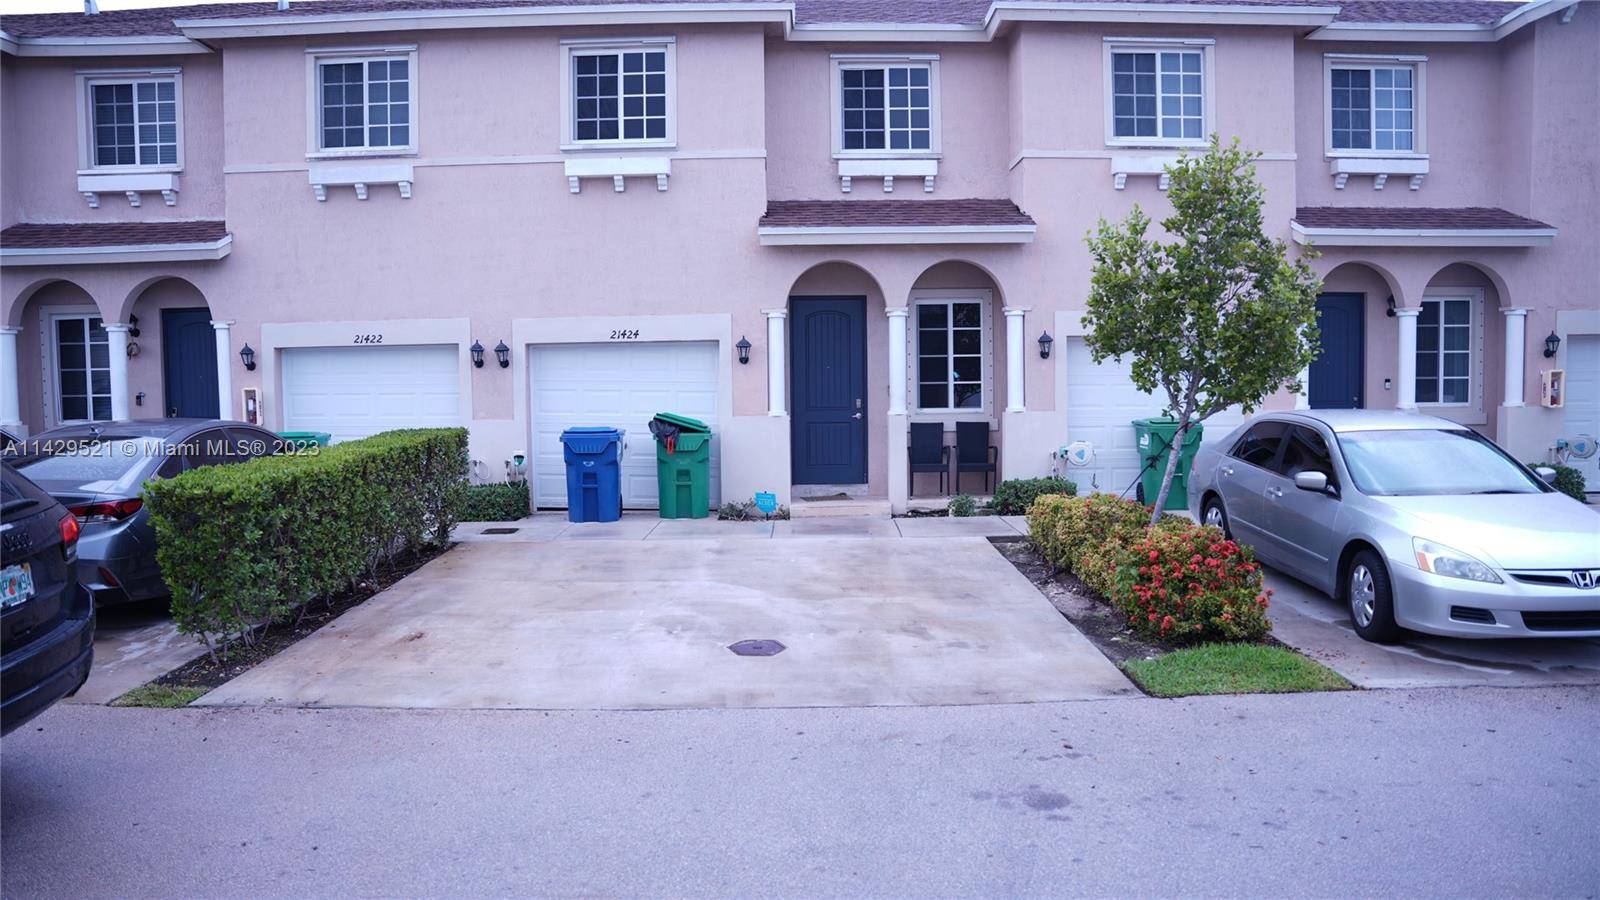 Beautiful 4 bedroom 3 bathroom Townhouse located in the wonderful city of Miami Gardens featuring a 1 car garage.